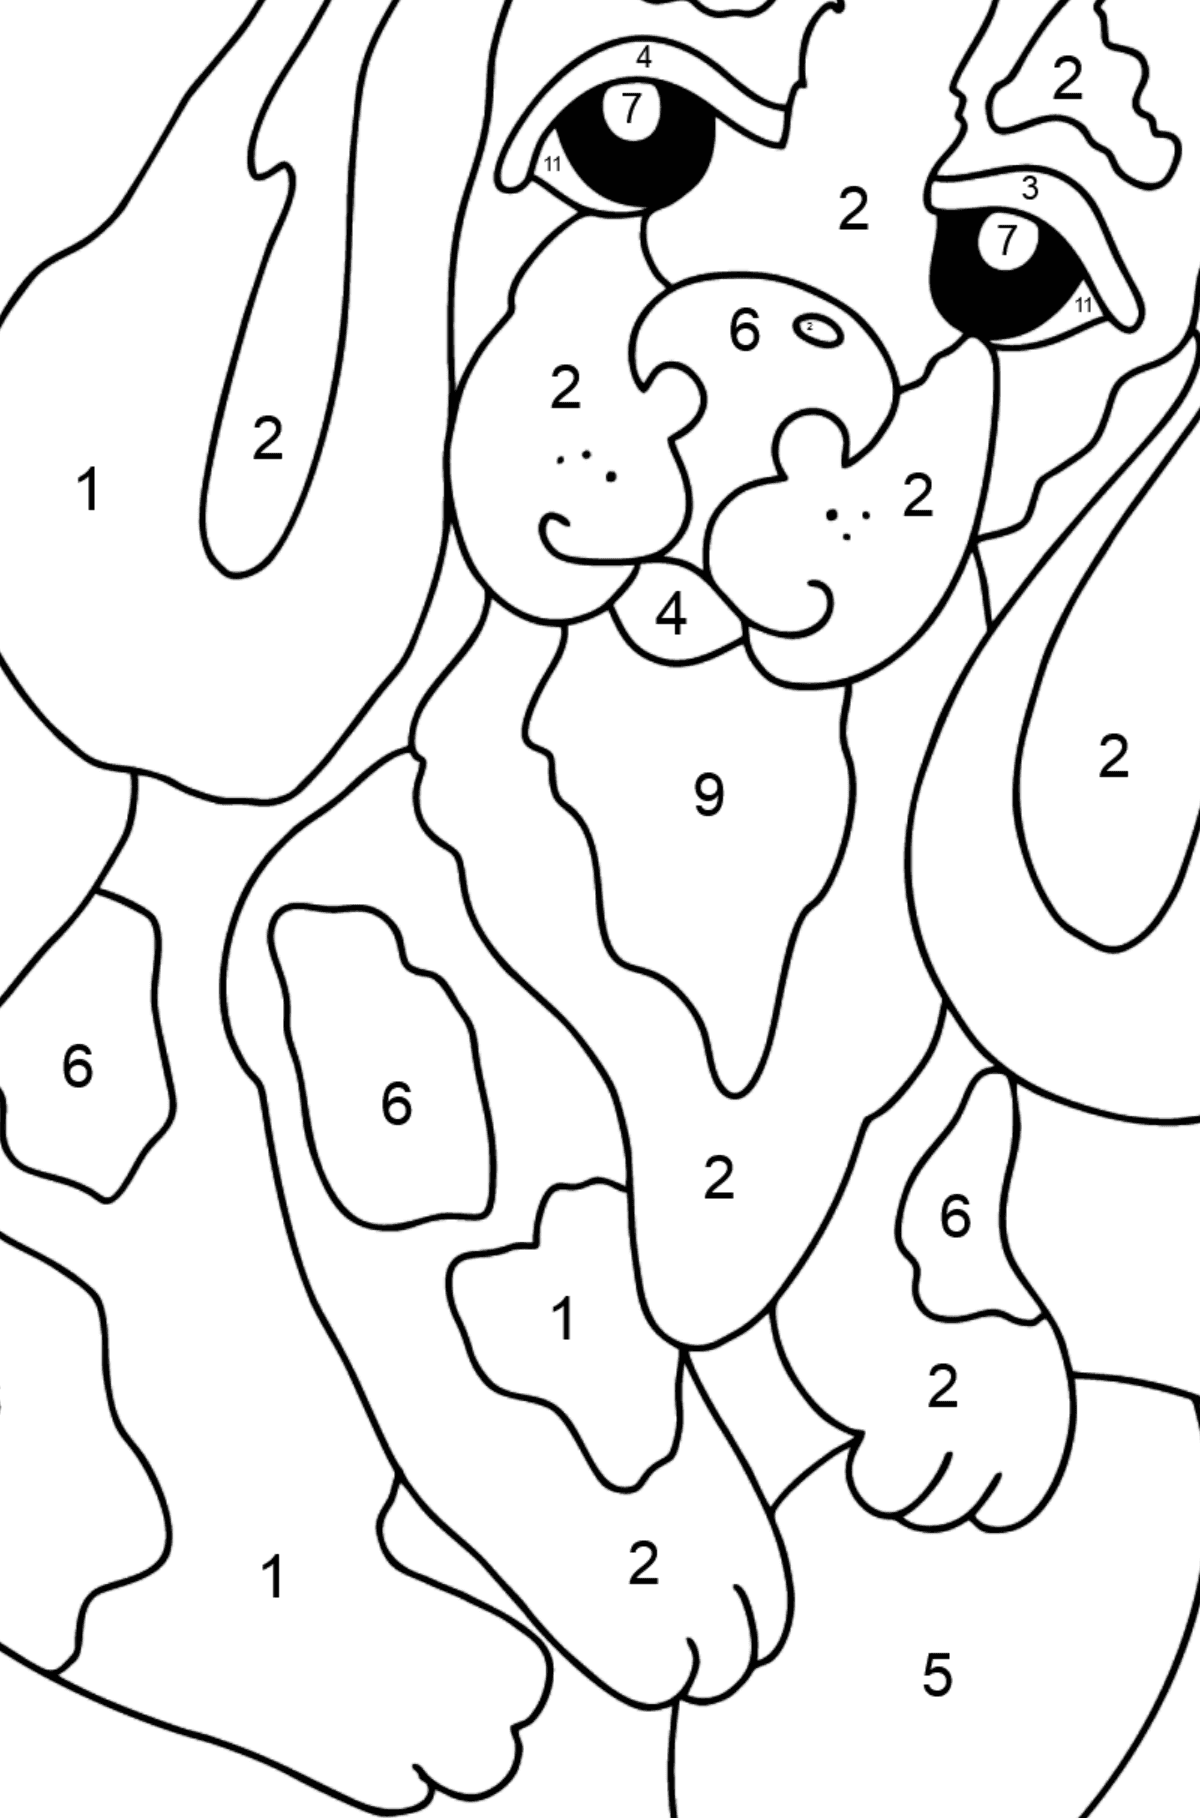 Coloring Page - A Dog with a Ball - Coloring by Numbers for Kids